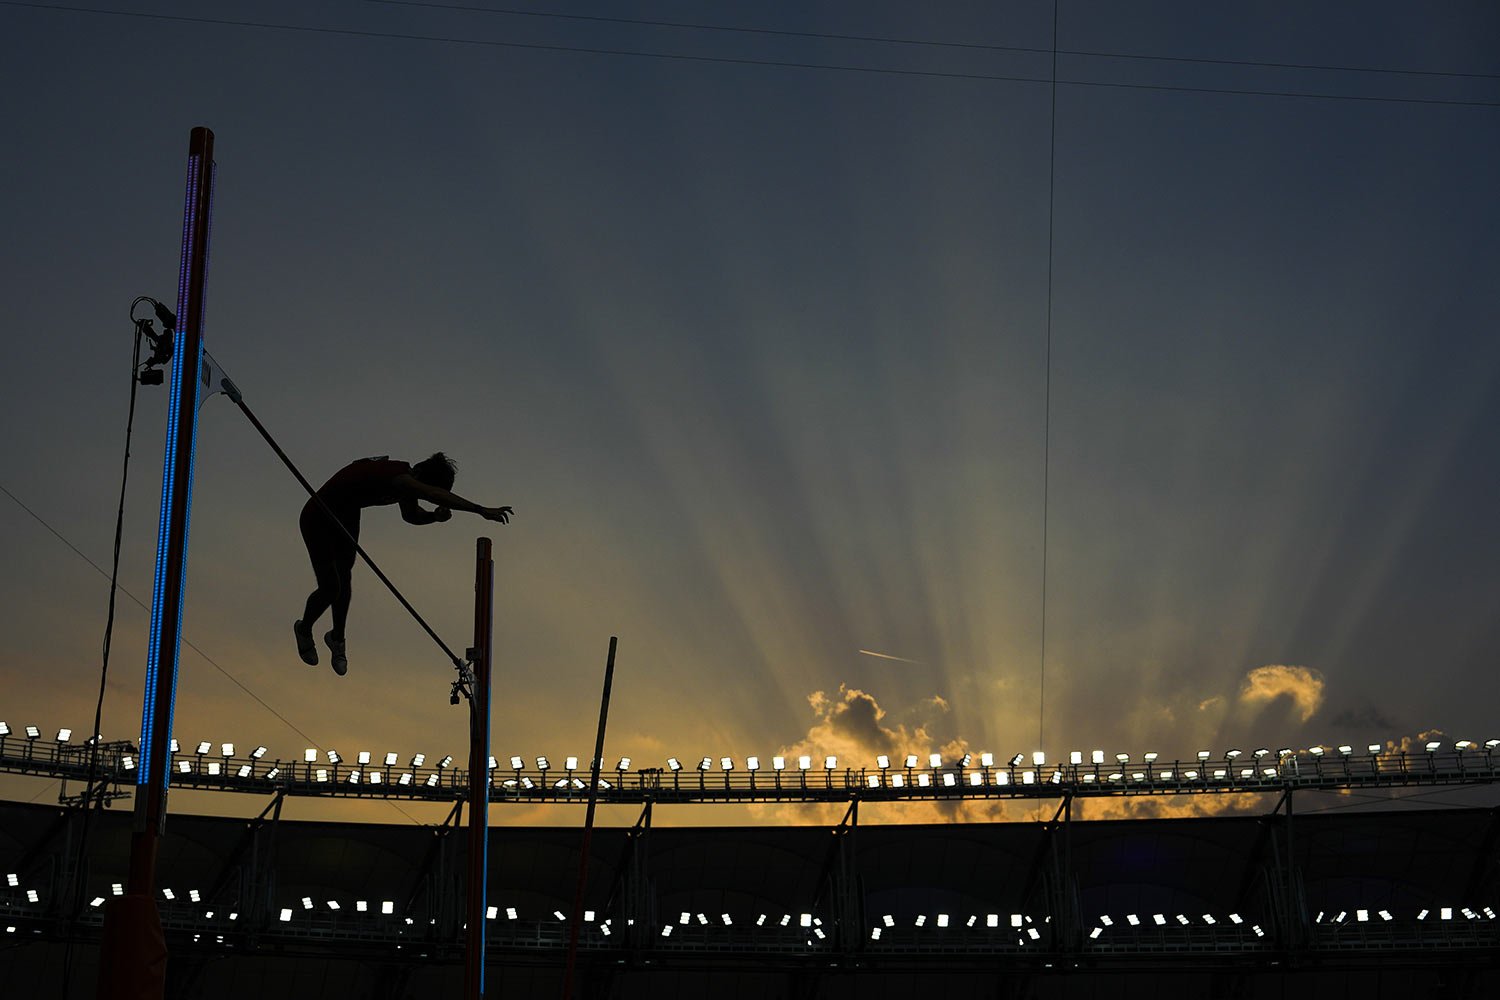  Bokai Huang, of China, competes in the men's pole vault final during the World Athletics Championships in Budapest, Hungary, Aug. 26, 2023. (AP Photo/Ashley Landis) 